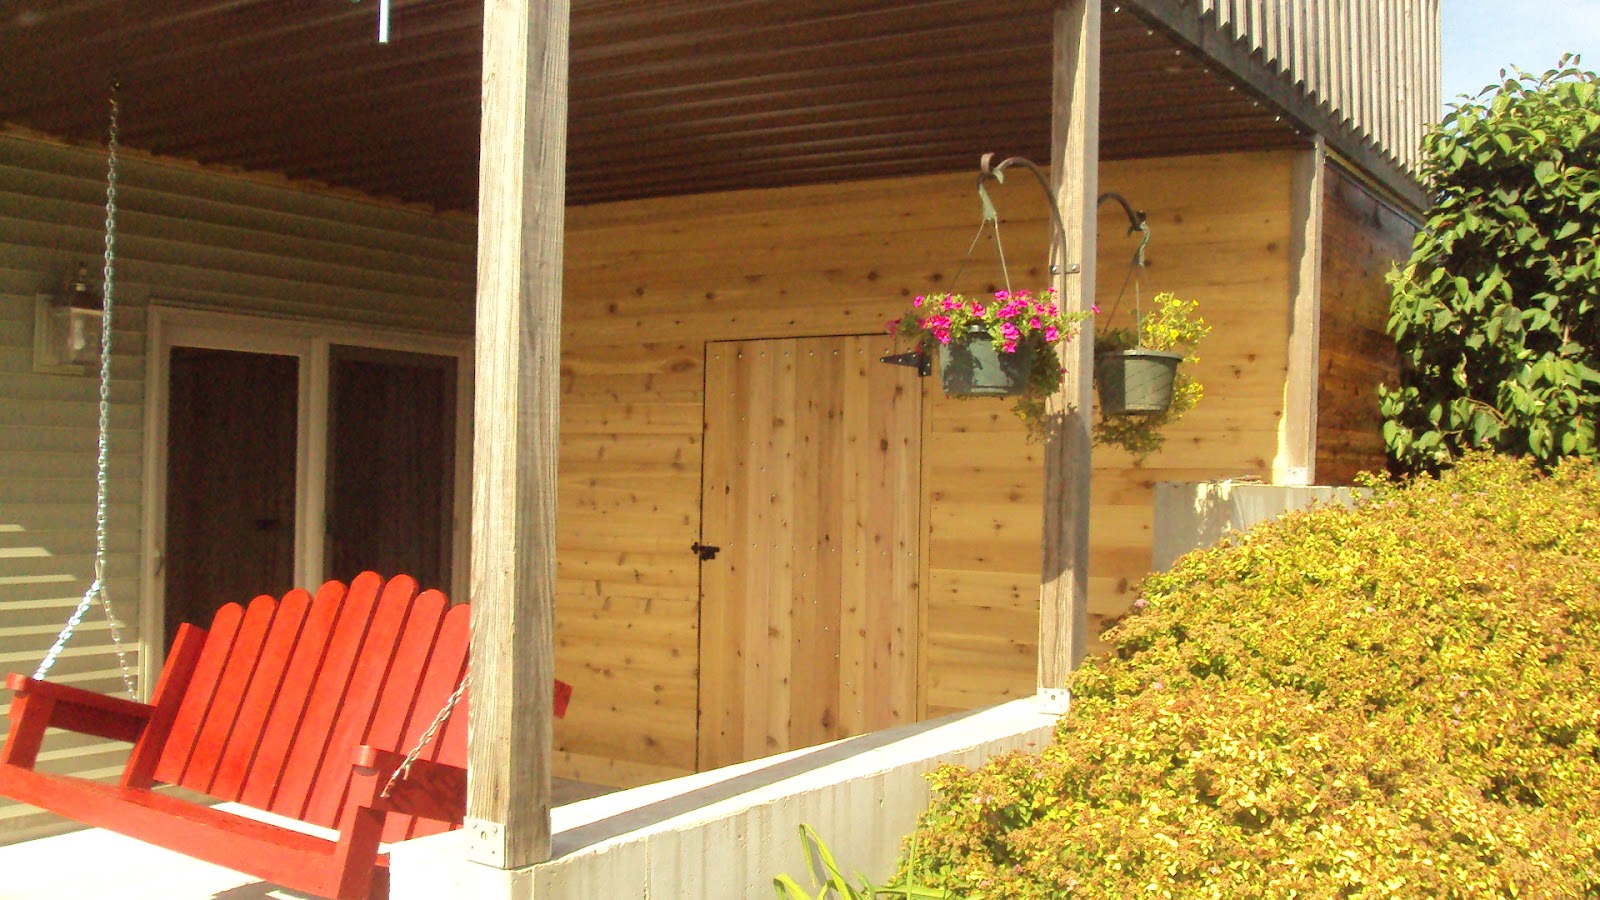 How To Build A Metal Shed From Scratch | Woodworking Plans